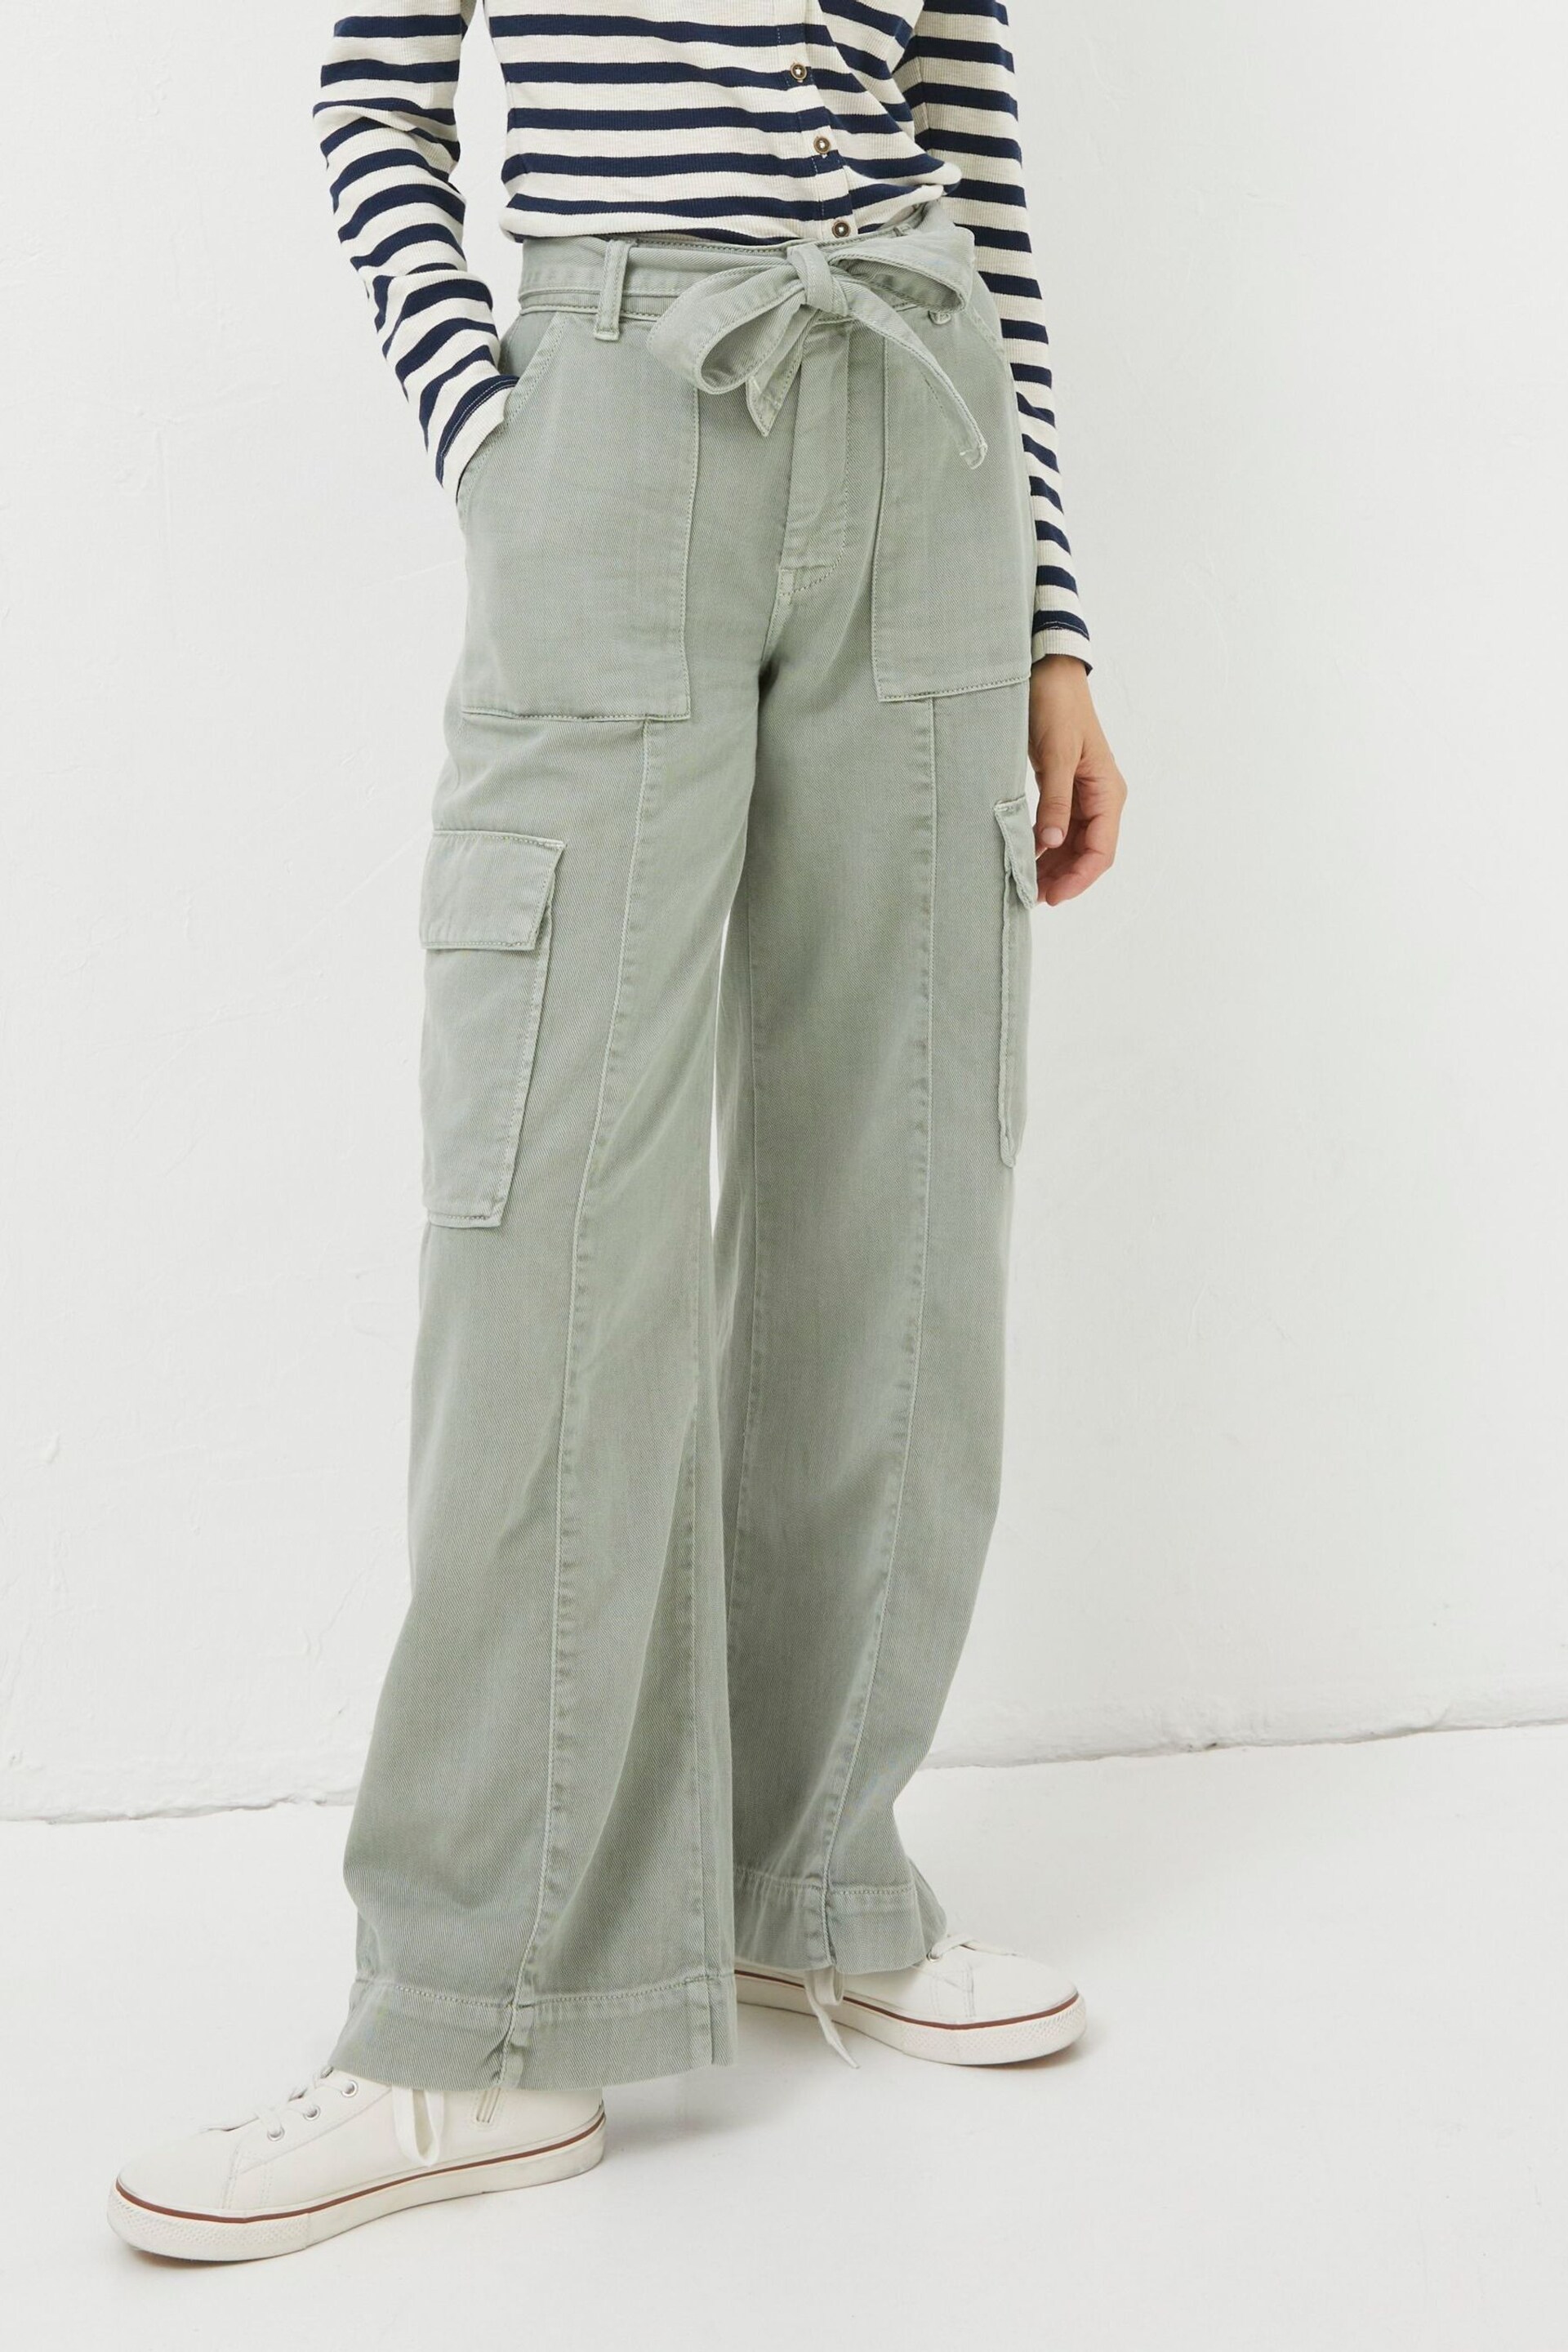 FatFace Green Bodi Belted Cargo Trousers - Image 3 of 5